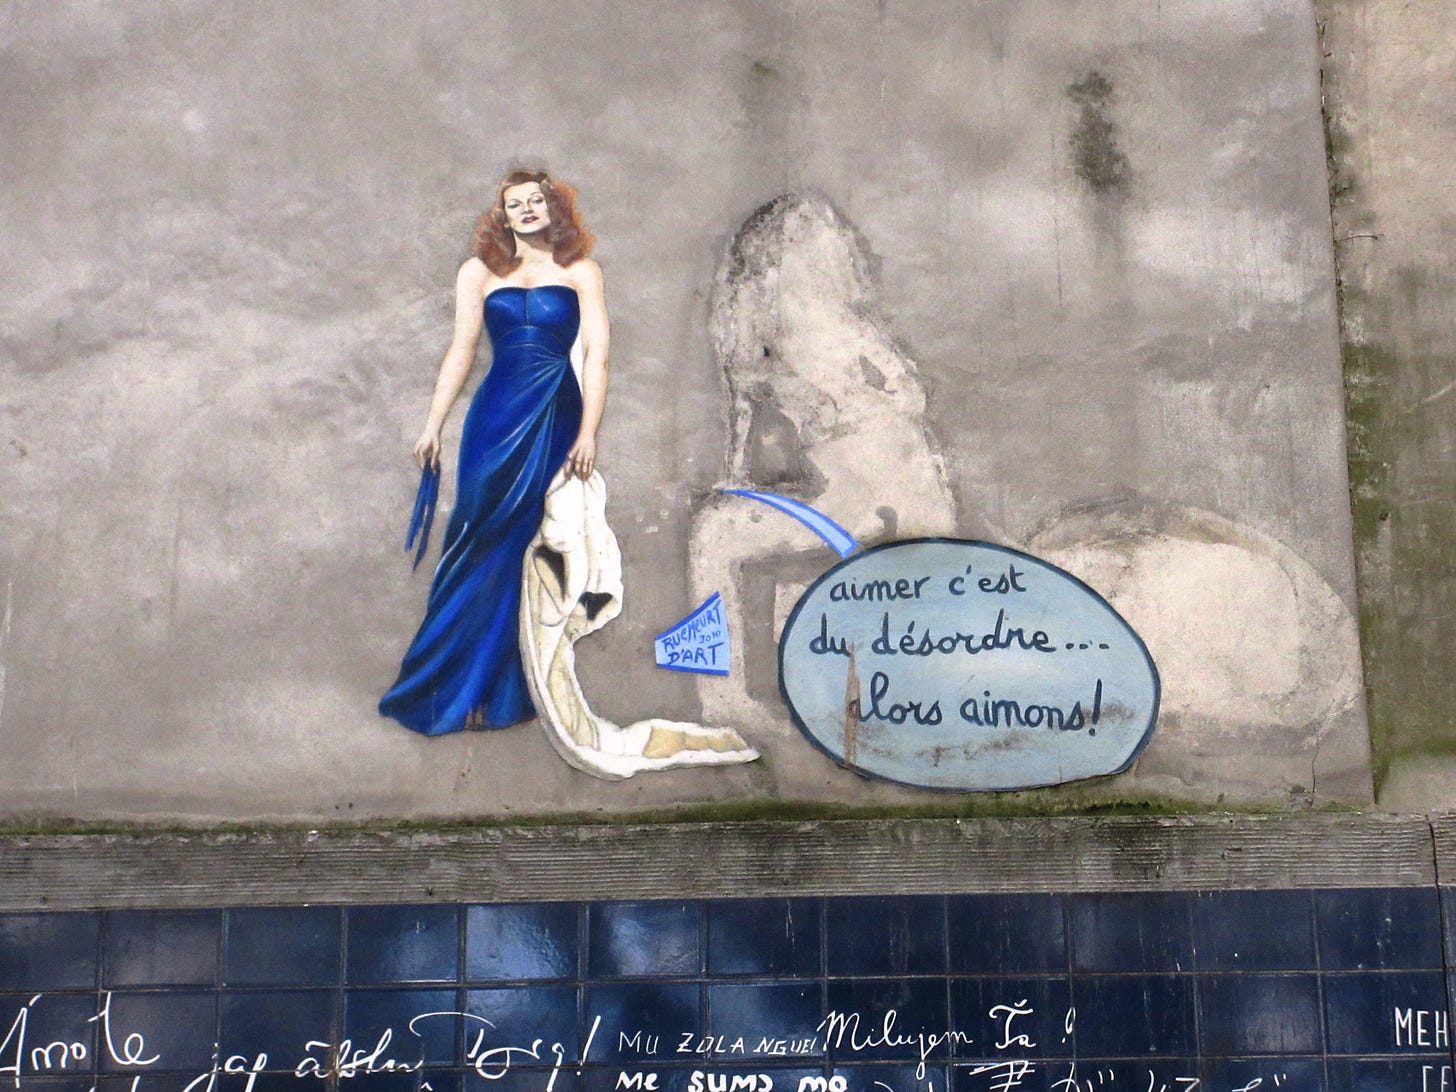 A picture of a woman painted on a wall in Paris.